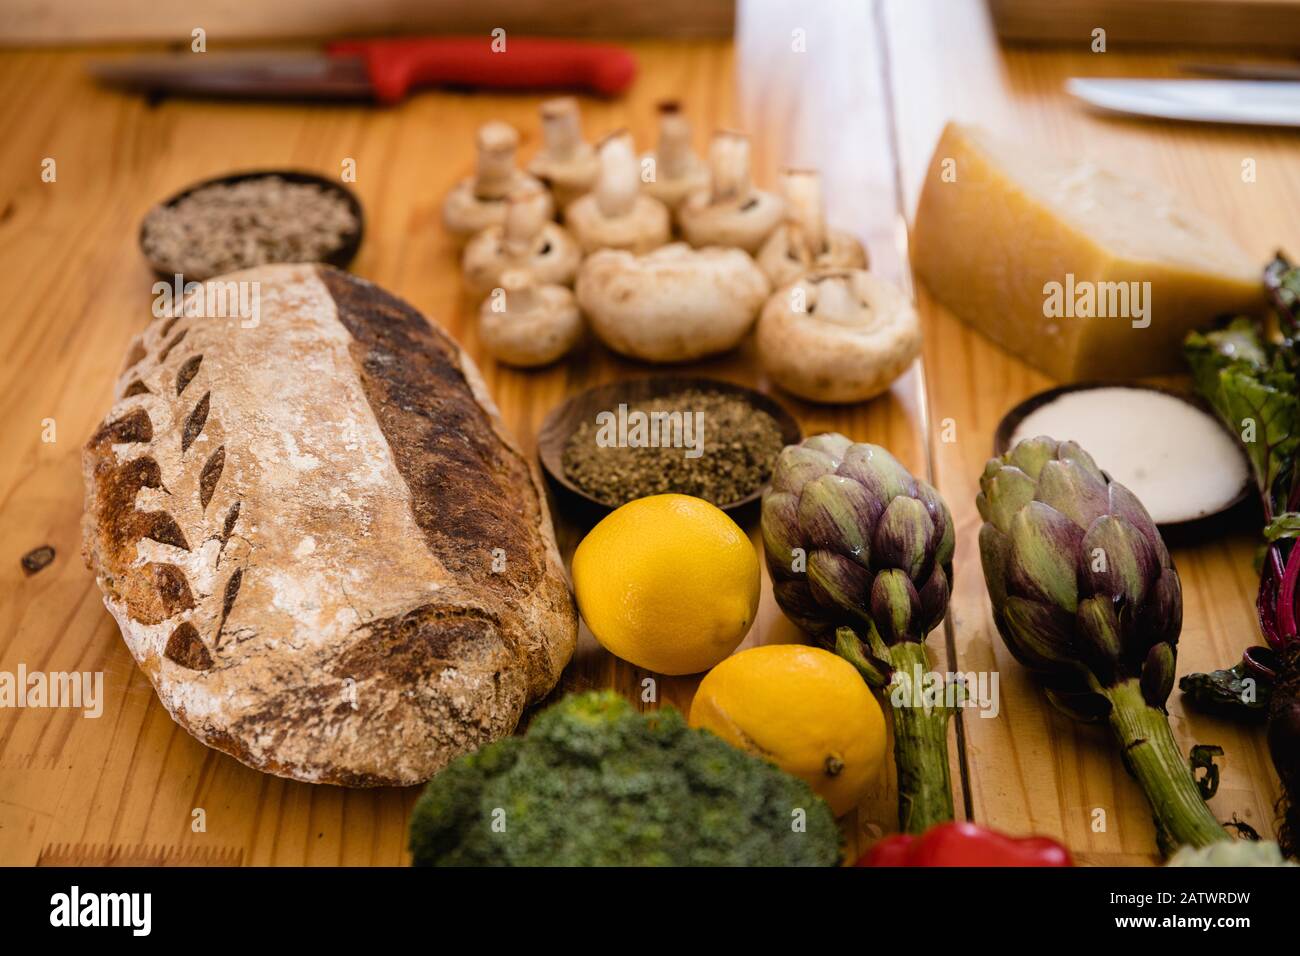 Vegetables and bread on the table Stock Photo